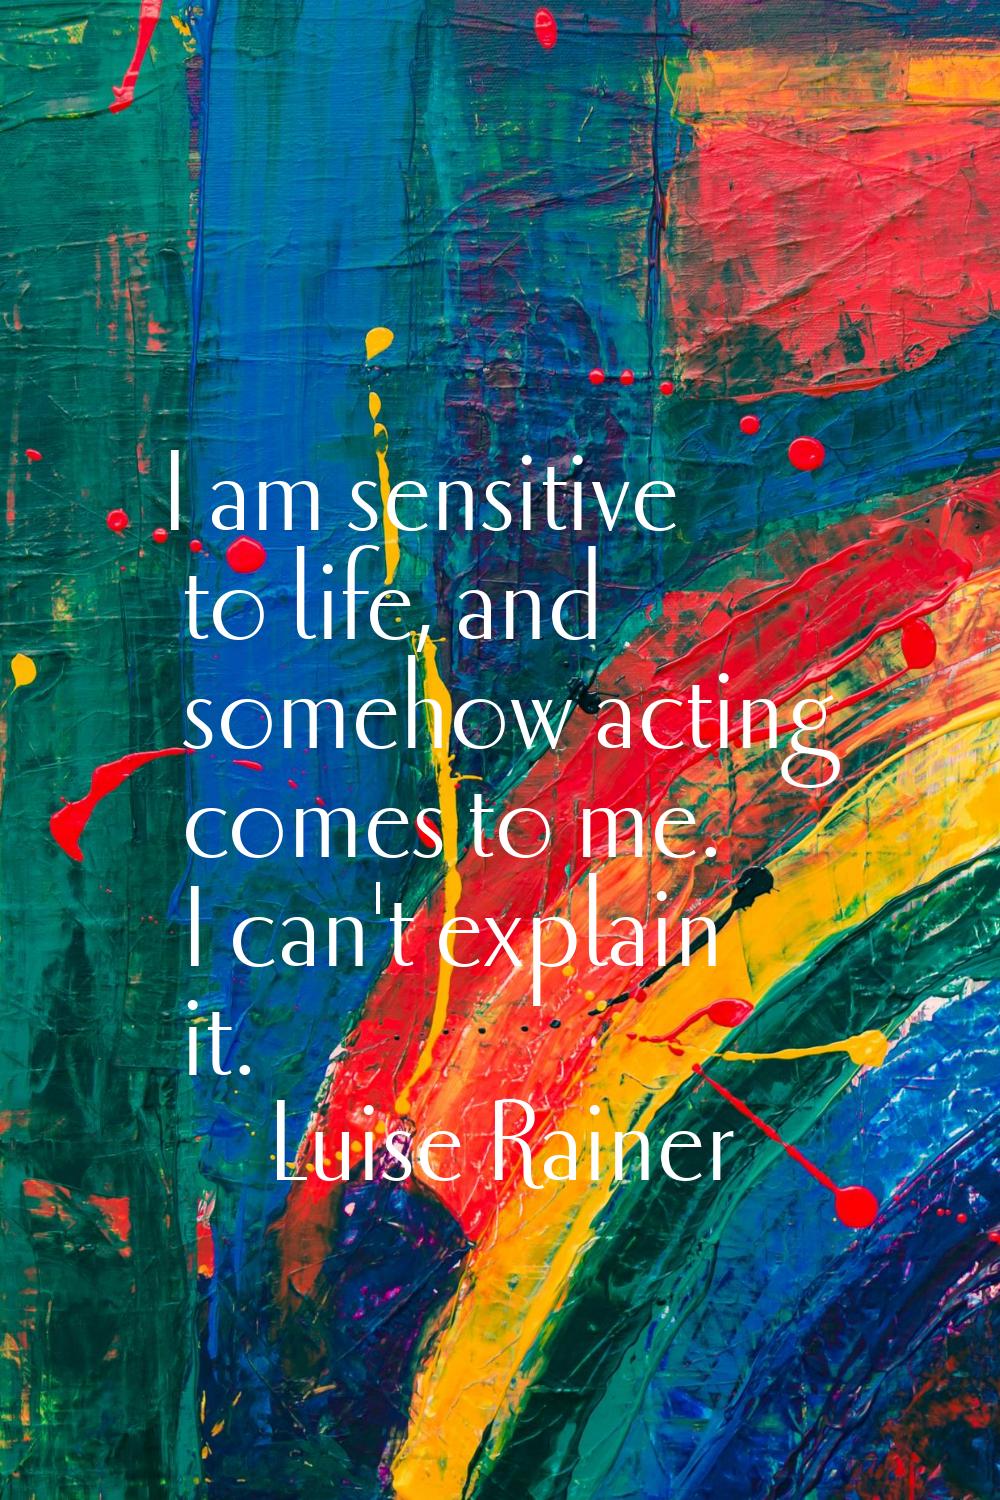 I am sensitive to life, and somehow acting comes to me. I can't explain it.